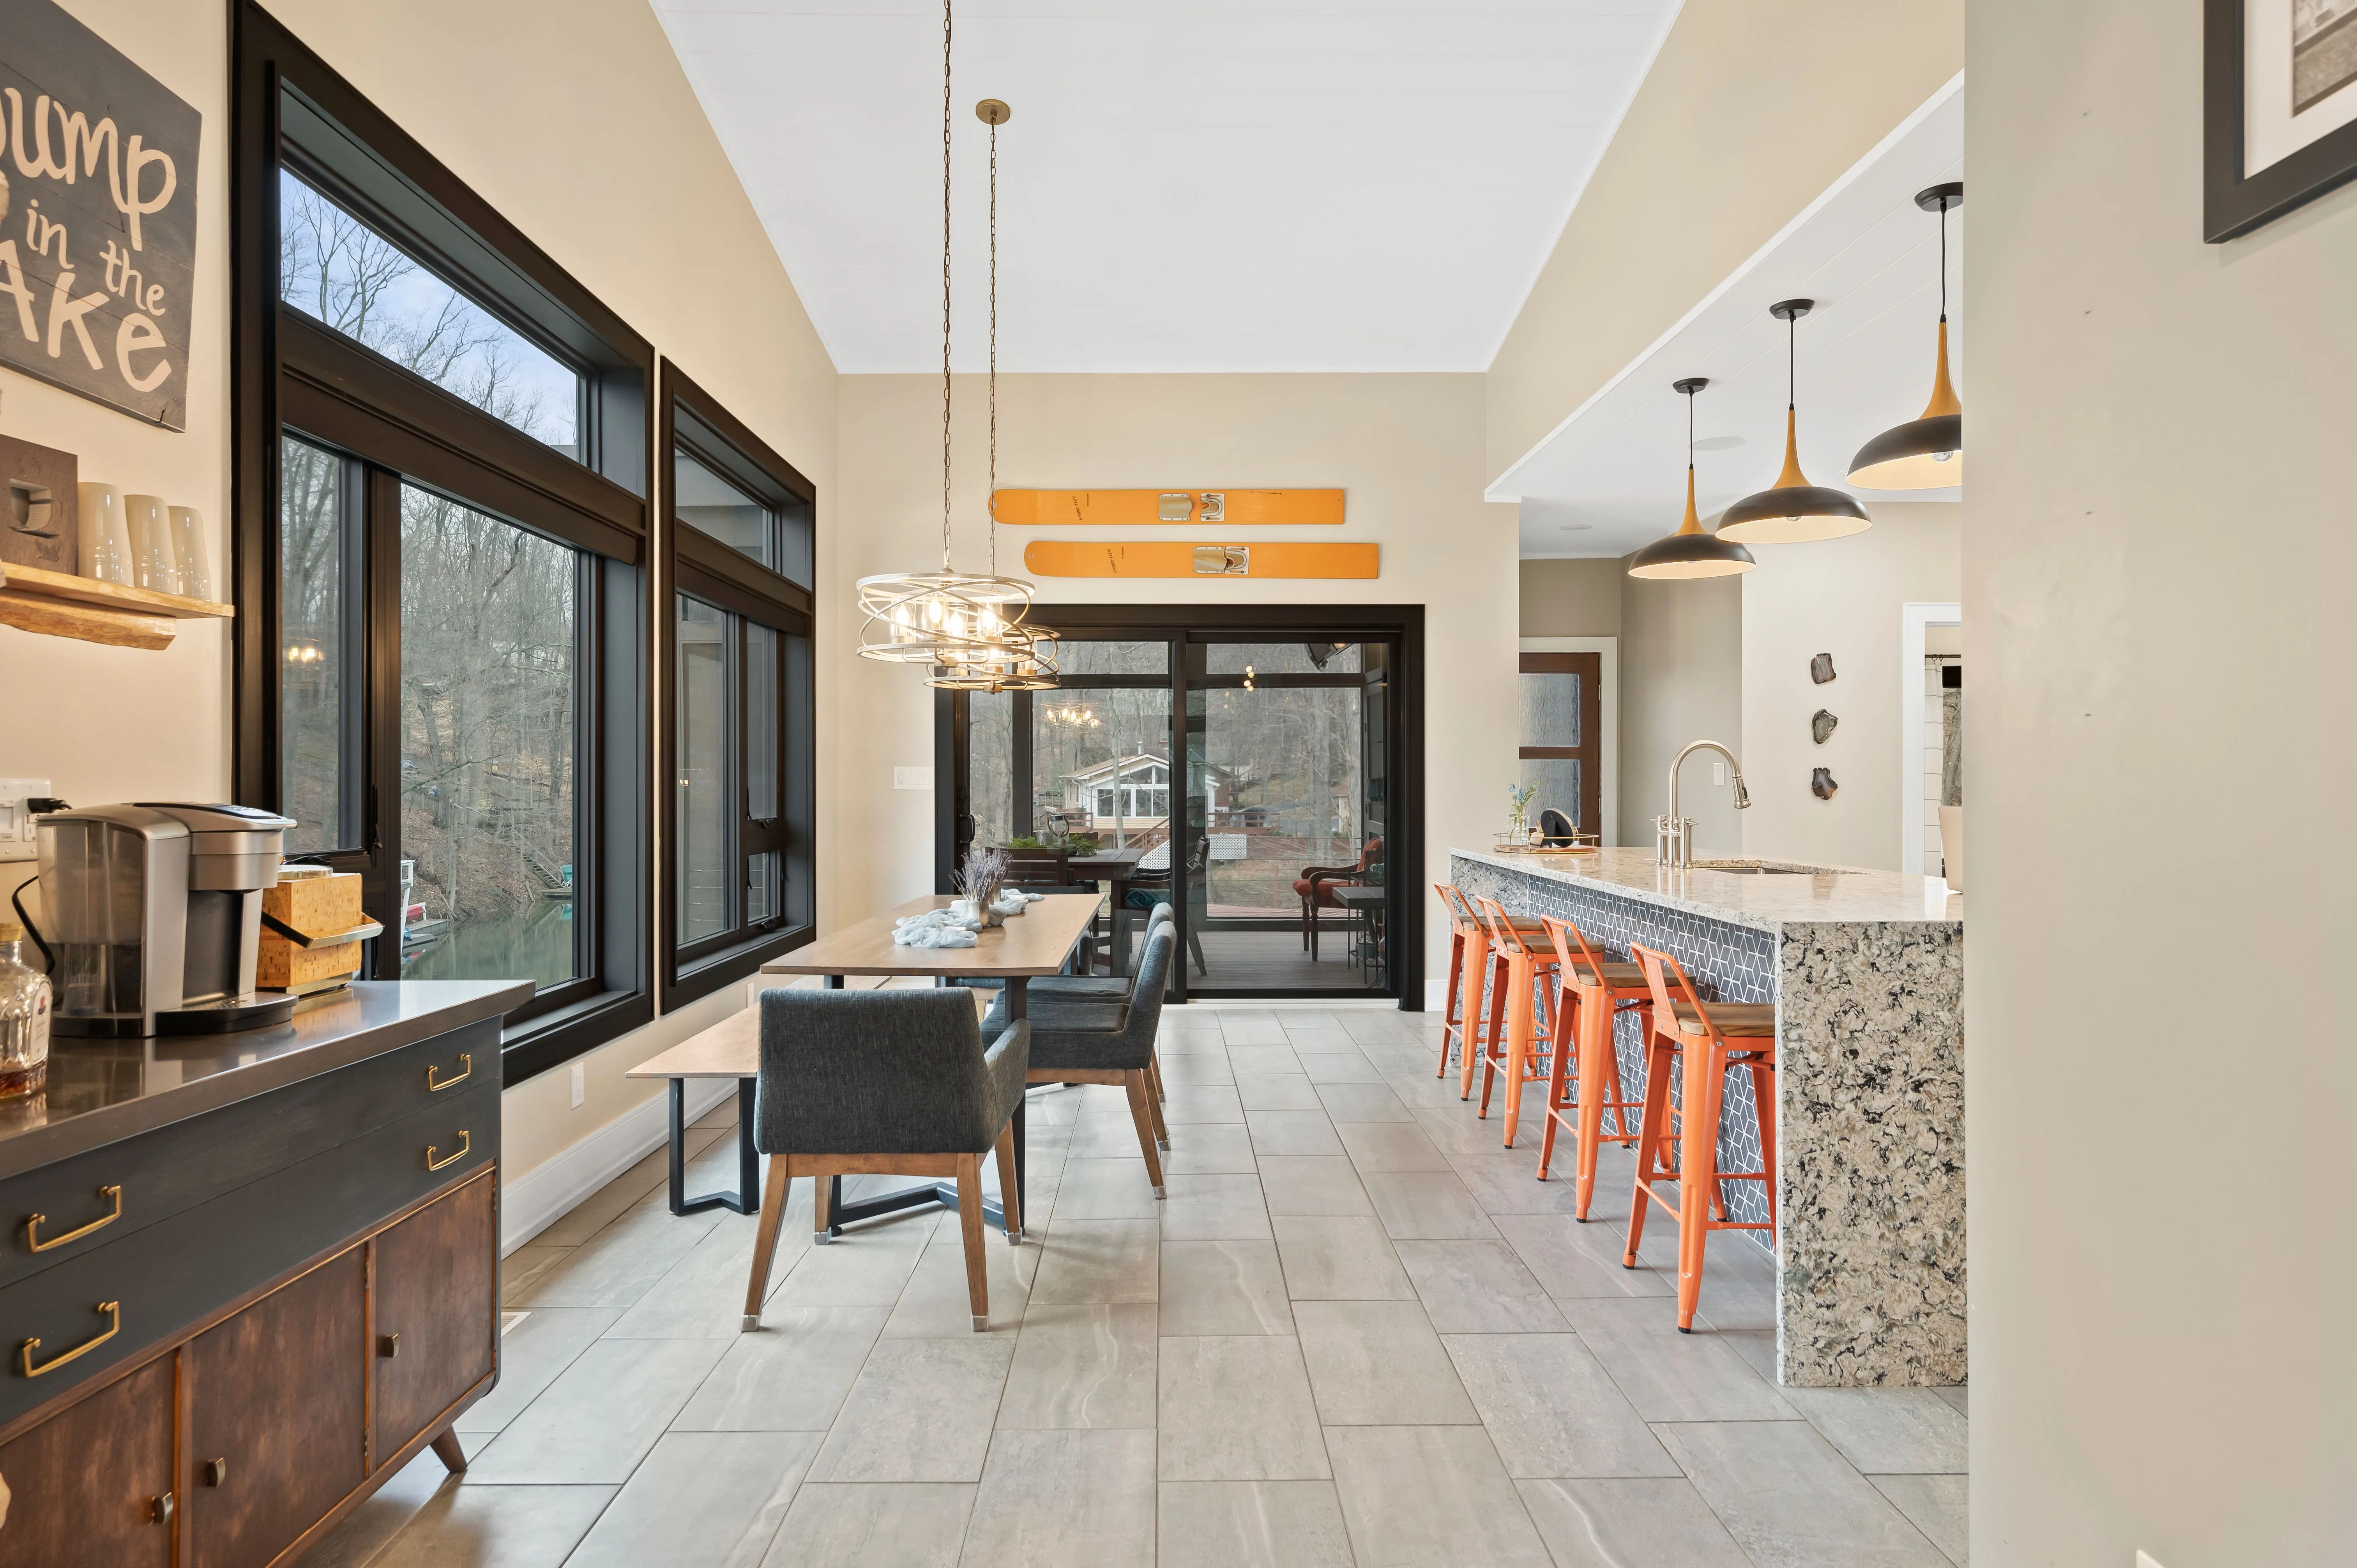 Modern kitchen with bar stools, pendant lights, and a dining area visible in the background.